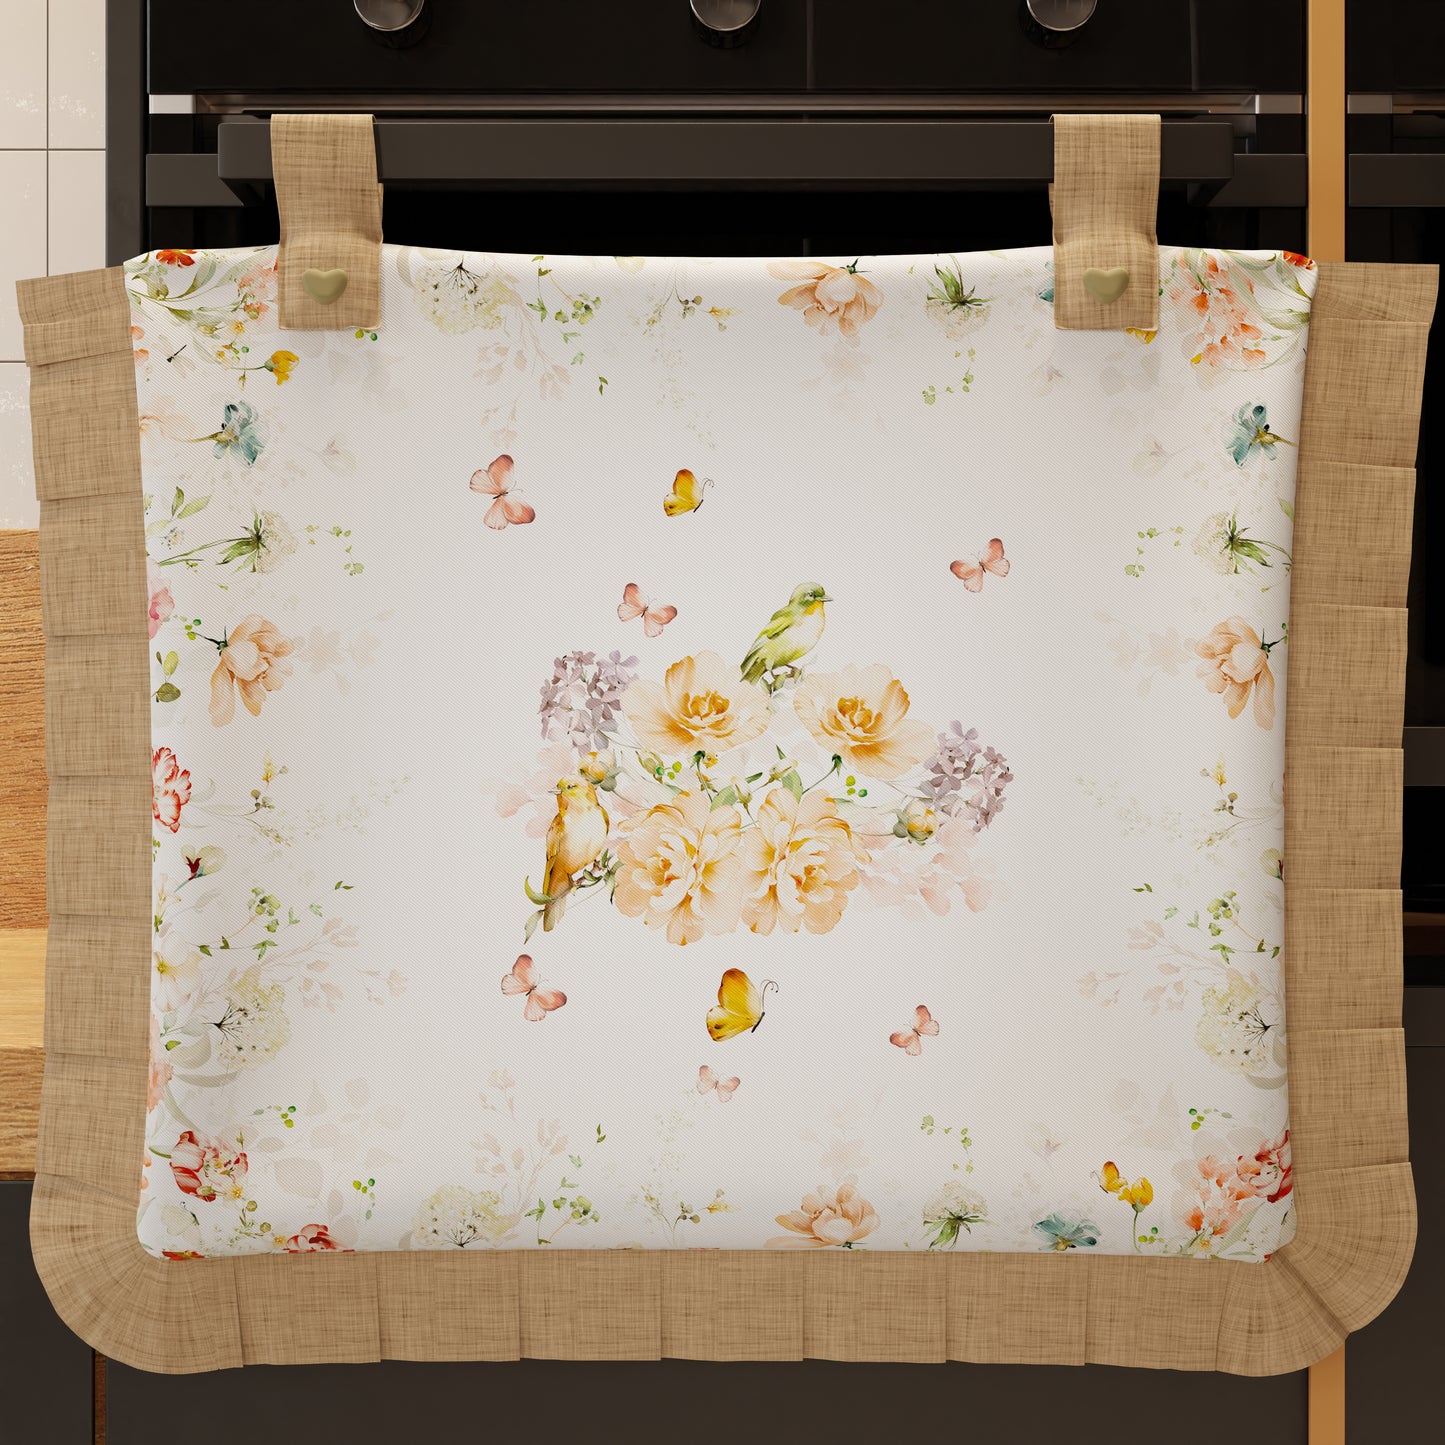 Oven Cover for Kitchen in Digital Floral Print 06 1pc 40x50cm